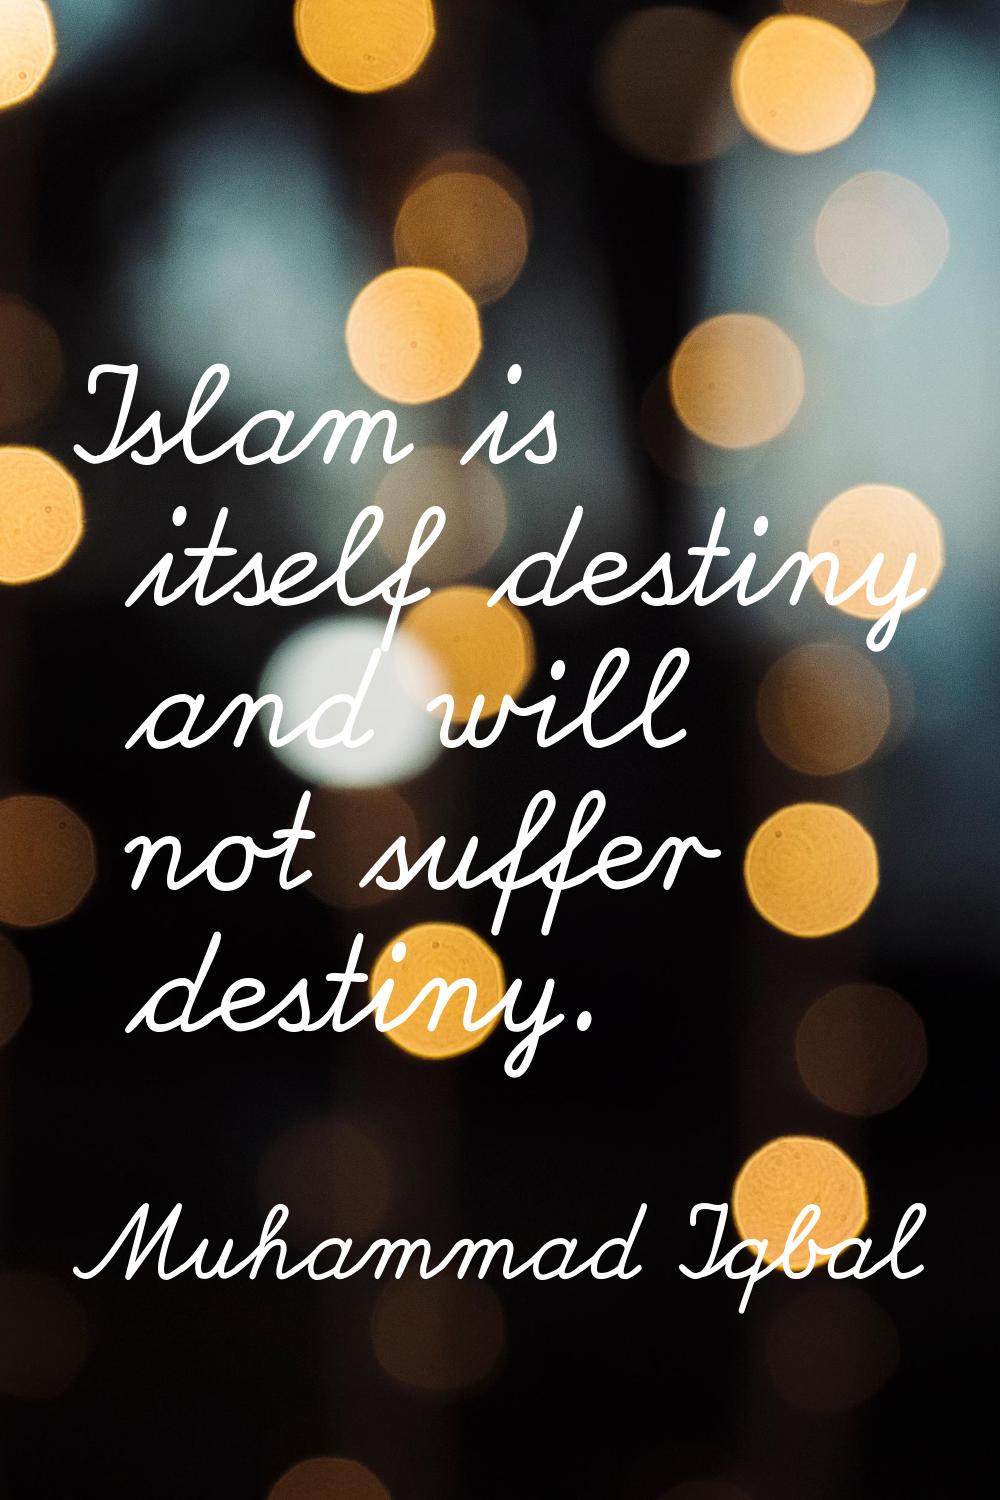 Islam is itself destiny and will not suffer destiny.